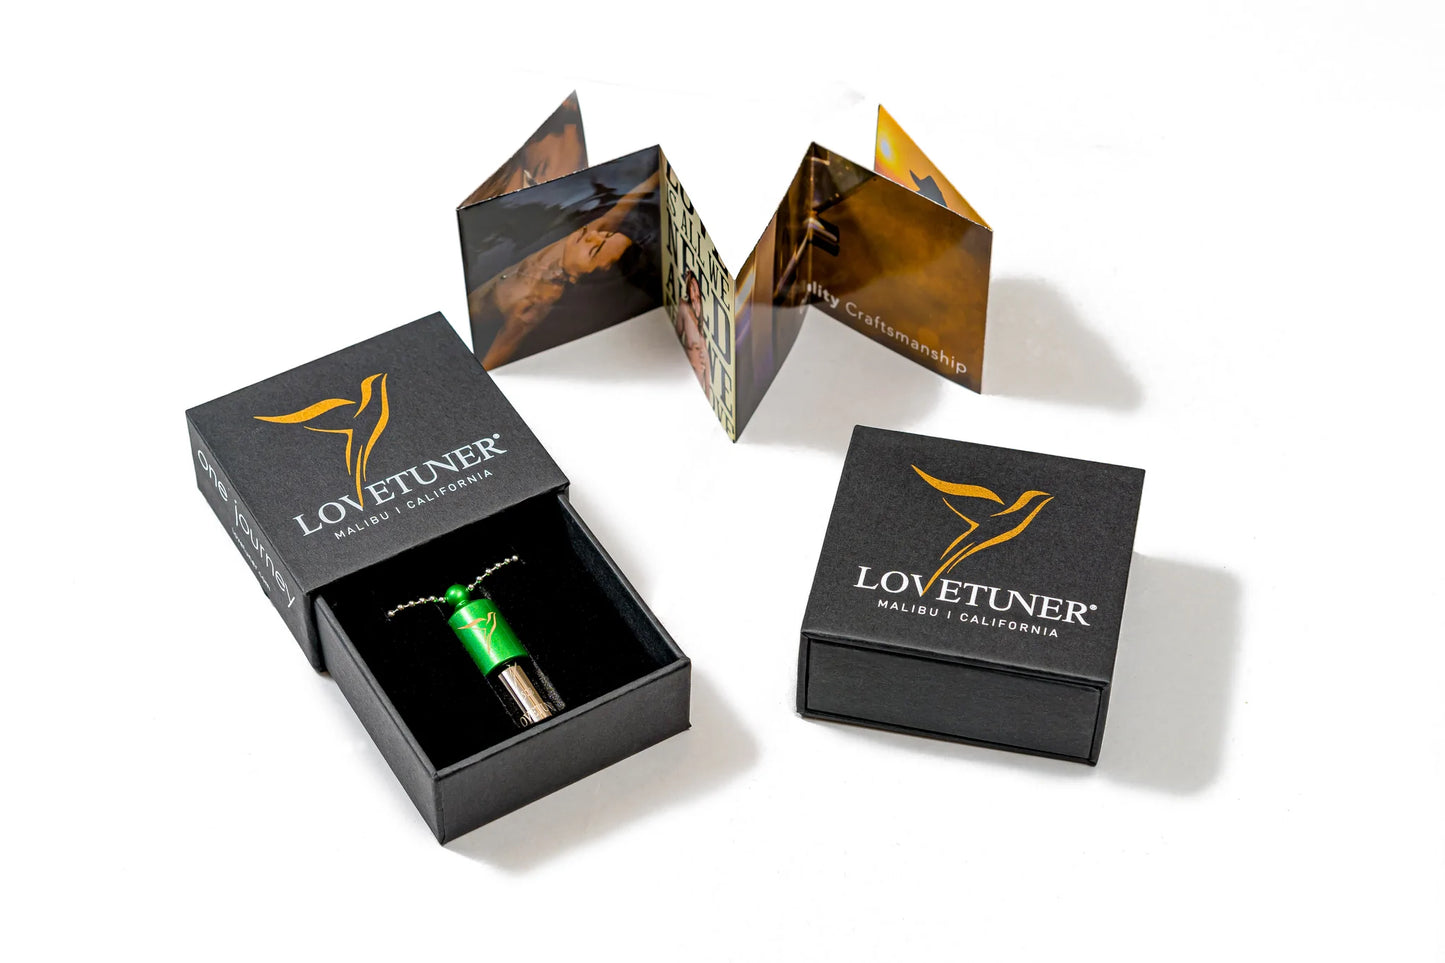 Lovetuner 528hz Breathing & Meditation Device - Ragtribe Ethical Clothing & Productions, LLC